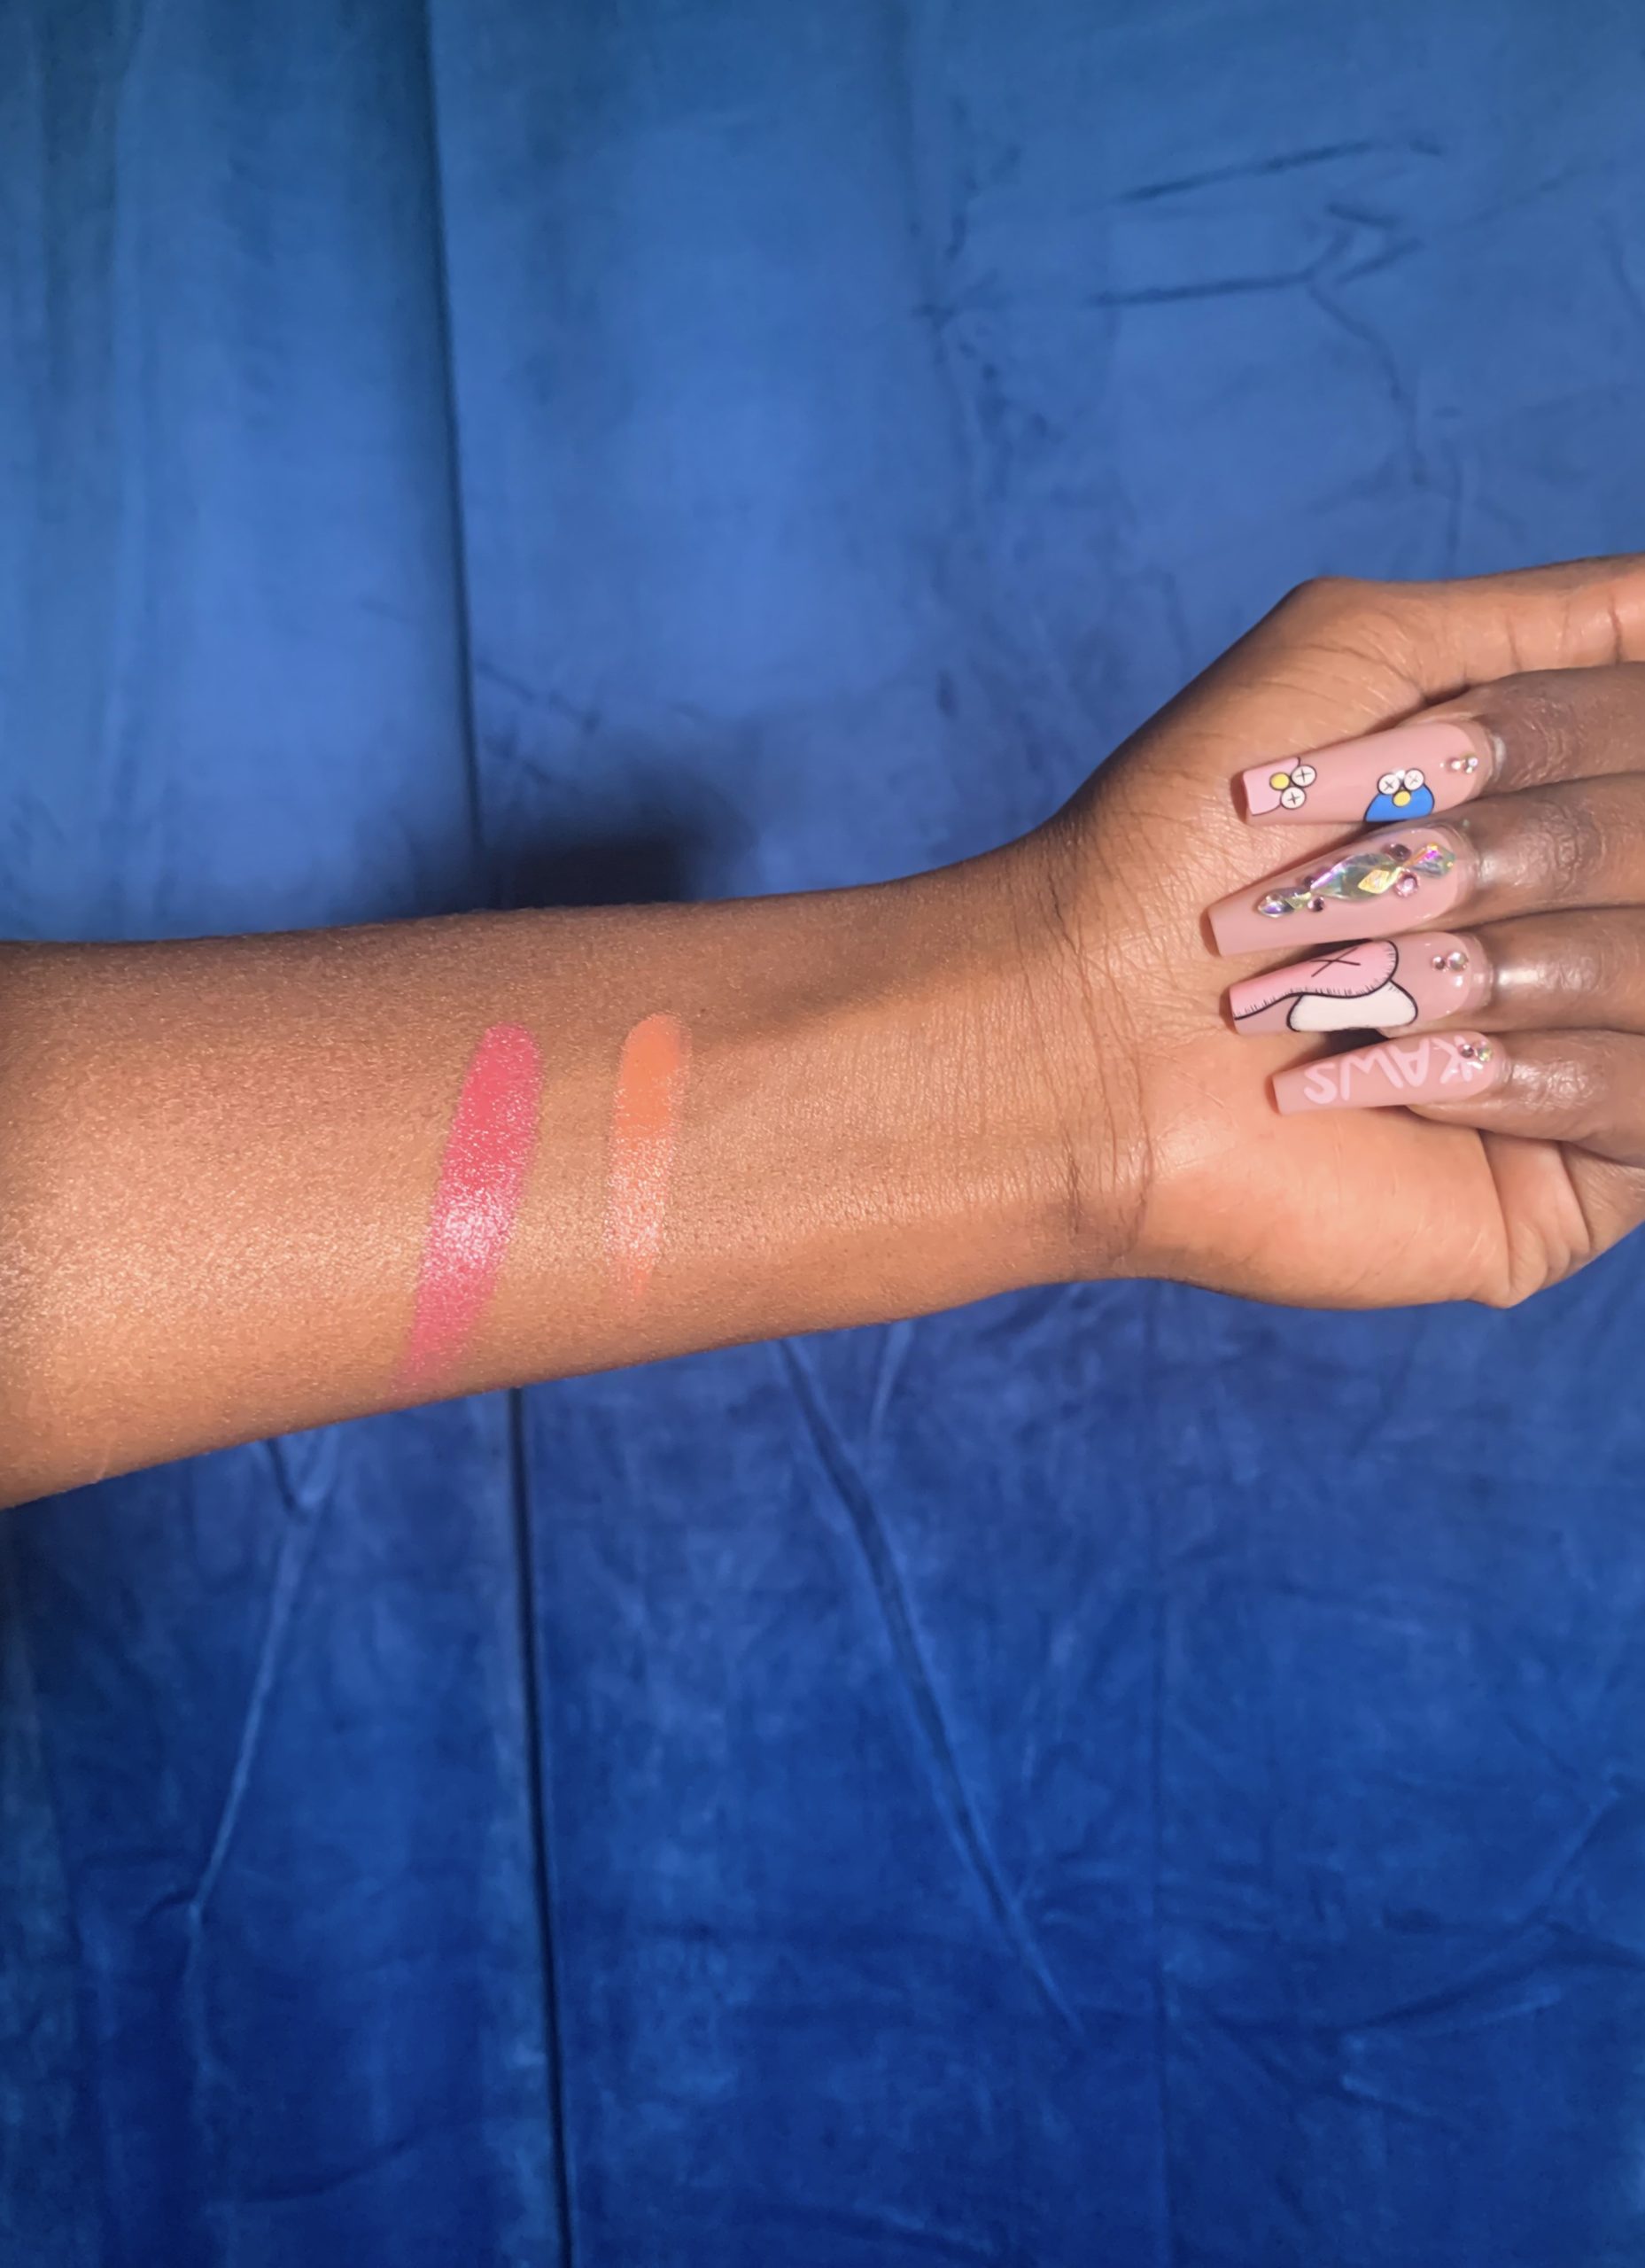 Black woman showing swatches of tower 28 cream blushes